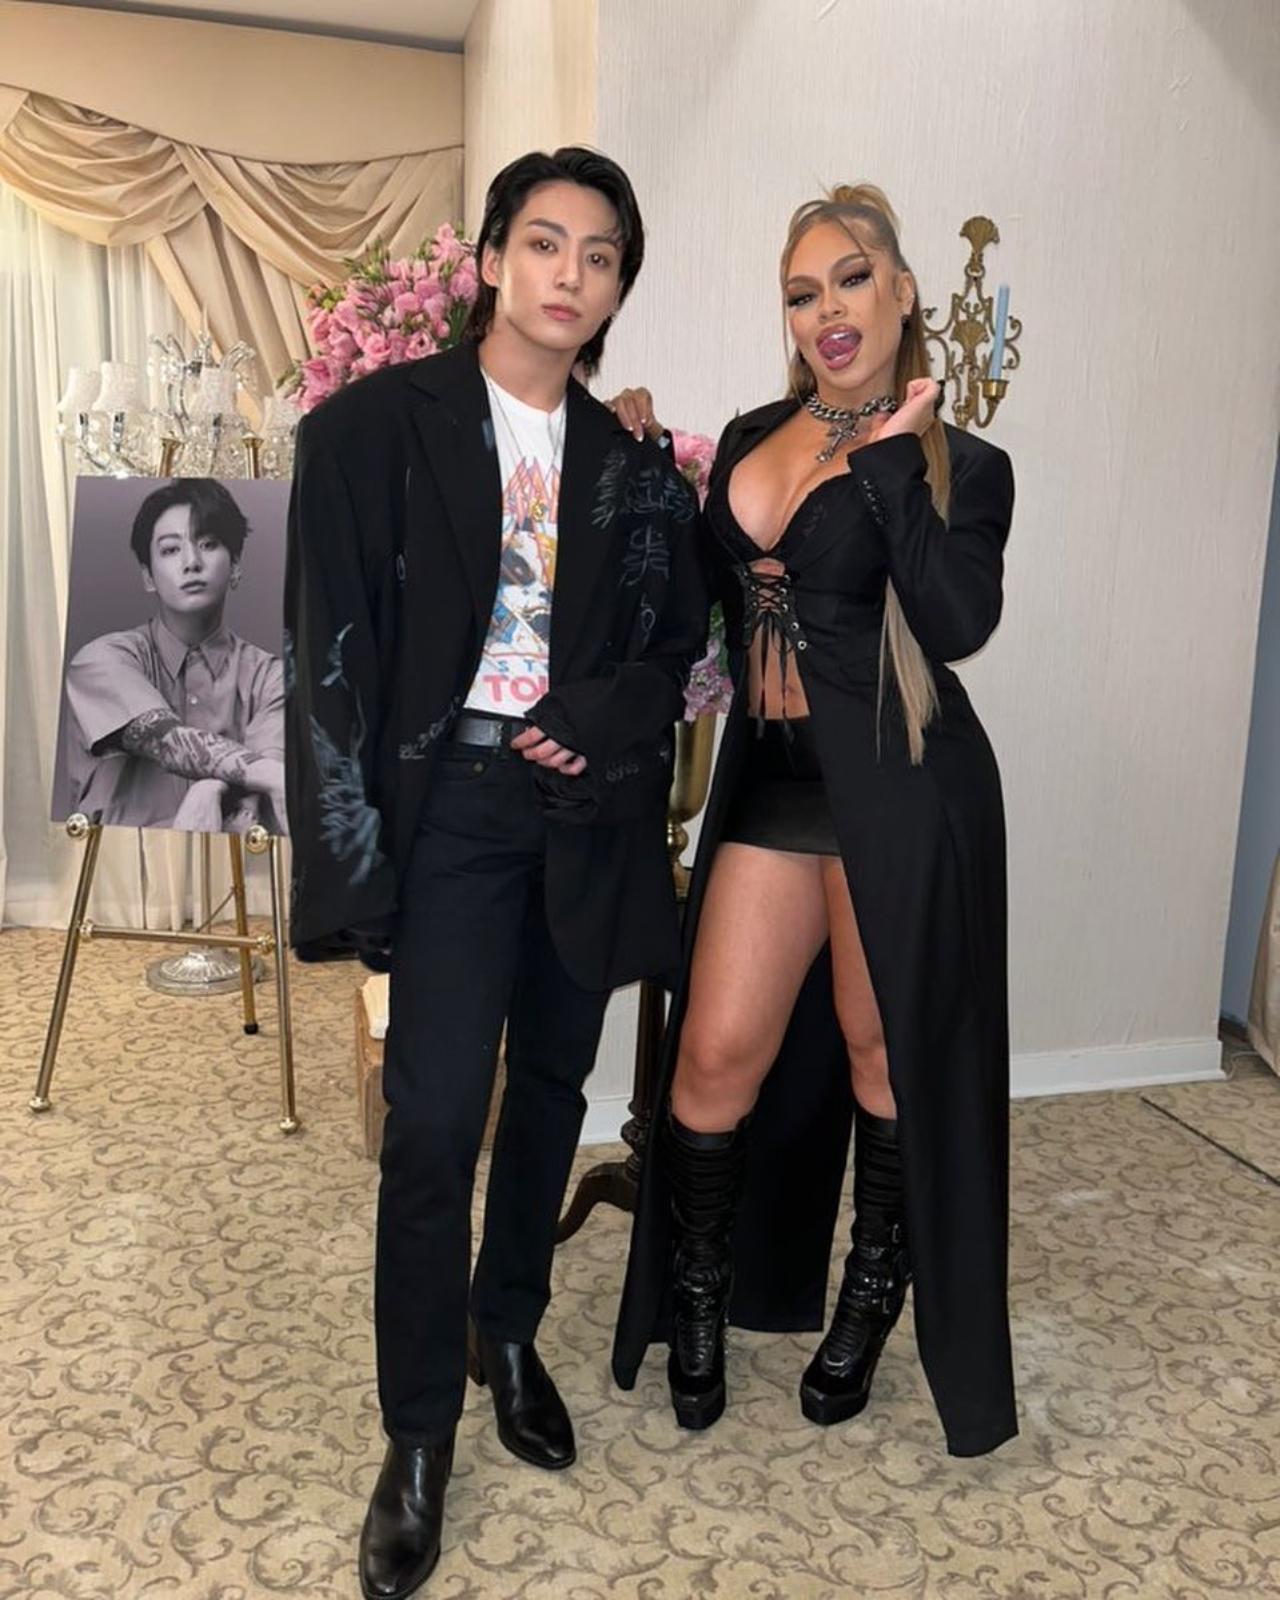 Latto, one of America's hottest rappers, also featured in the song. While she couldn't be there for the live performance, she posted a photo with Jungkook. JK said it was 'amazing' working with Latto and spoke about the musical synergy between them